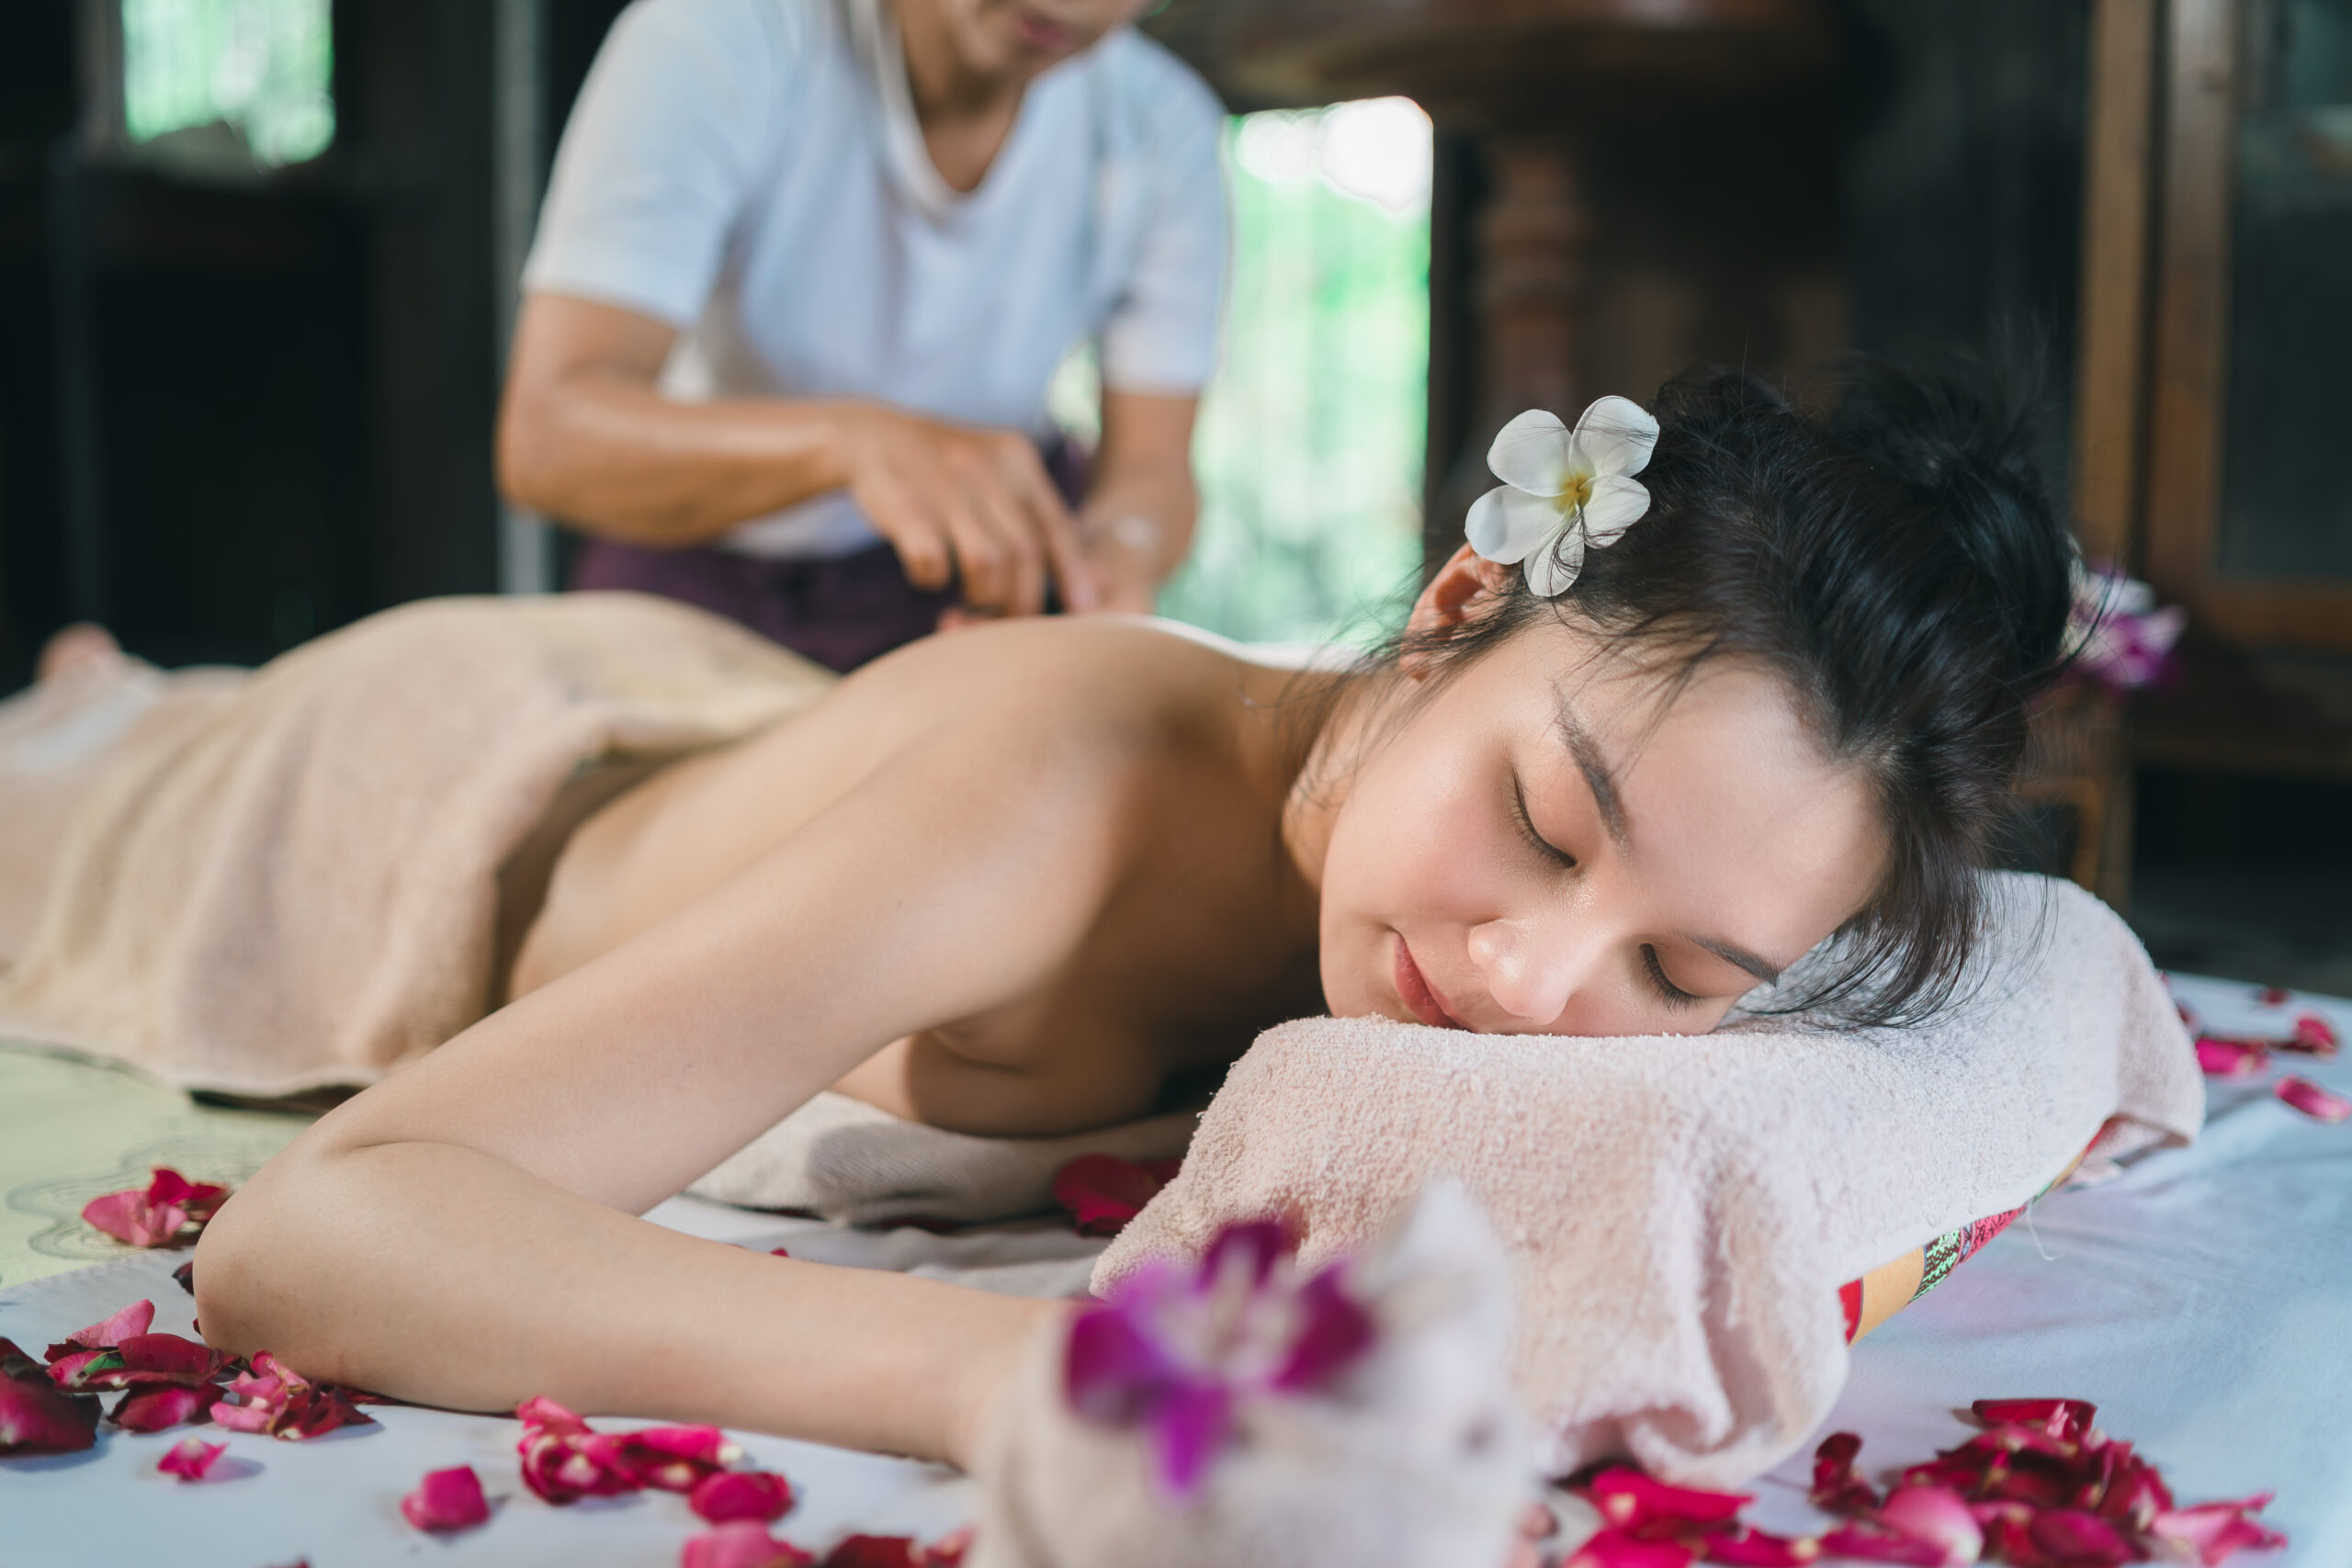 https://kingslynnthaimassage.com/wp-content/uploads/2023/03/massage-spa-relaxing-treatment-office-syndrome-using-hot-stone-traditional-thai-massage-style-asain-female-masseuse-doing-massage-treat-back-pain-arm-pain-stress-woman-tired-from-work-scaled.jpg